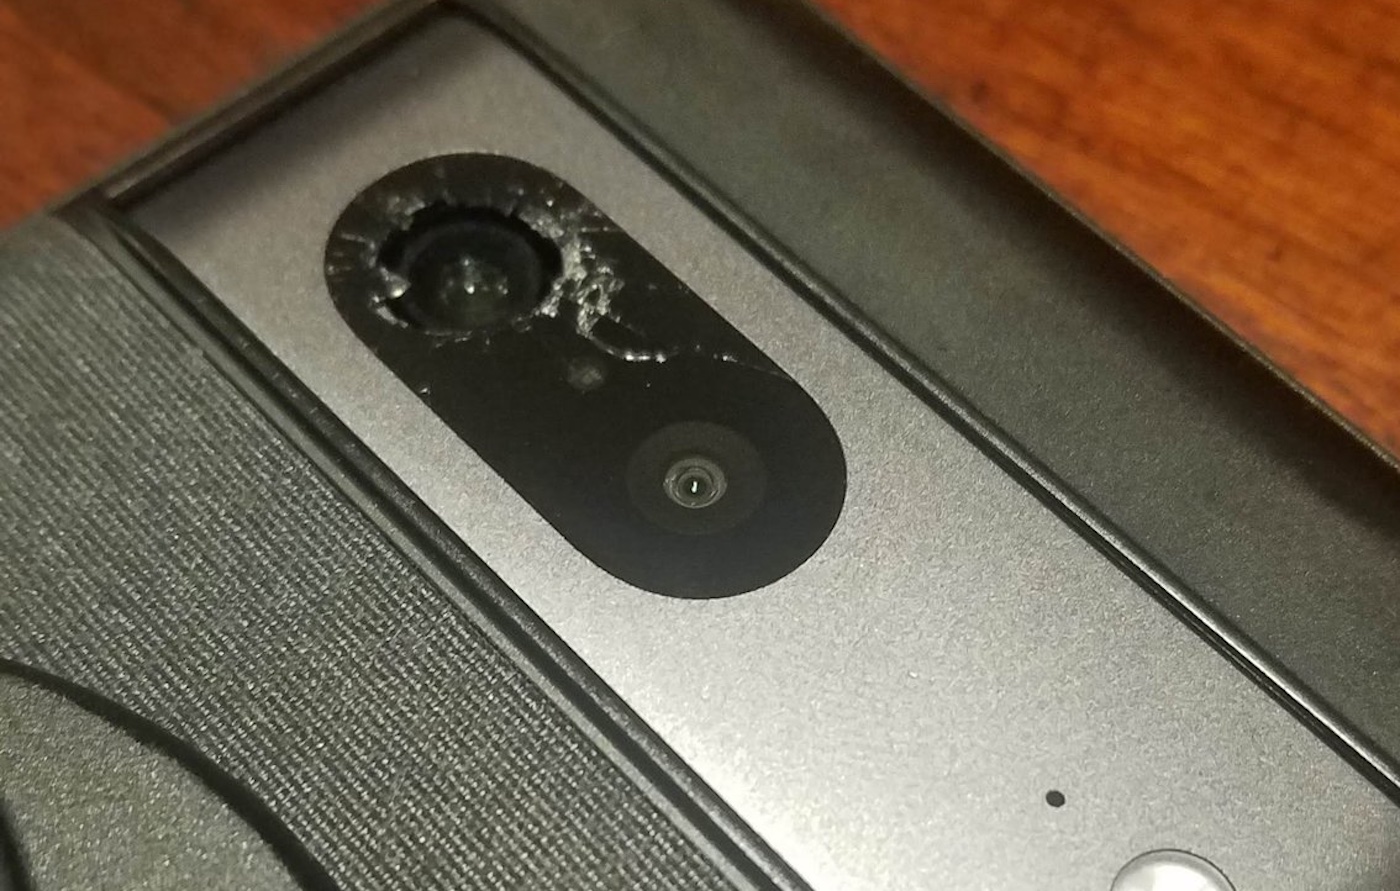 Pixel 7 rear camera glass breaks for some users